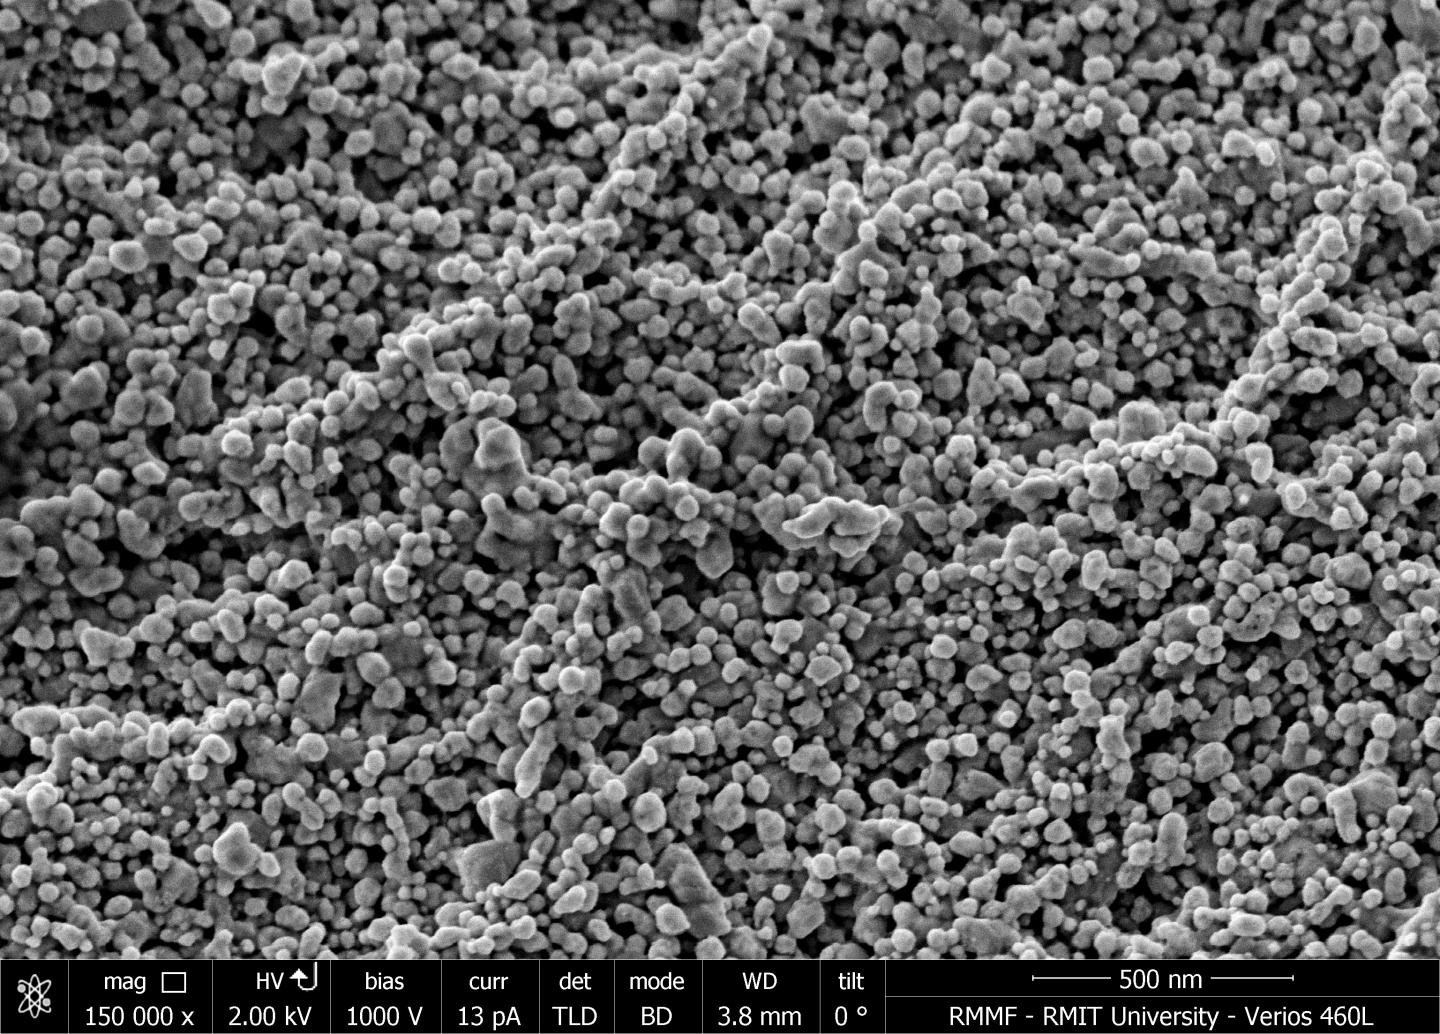 Close-Up of Nanostructures for Self-Cleaning Cotton Textiles